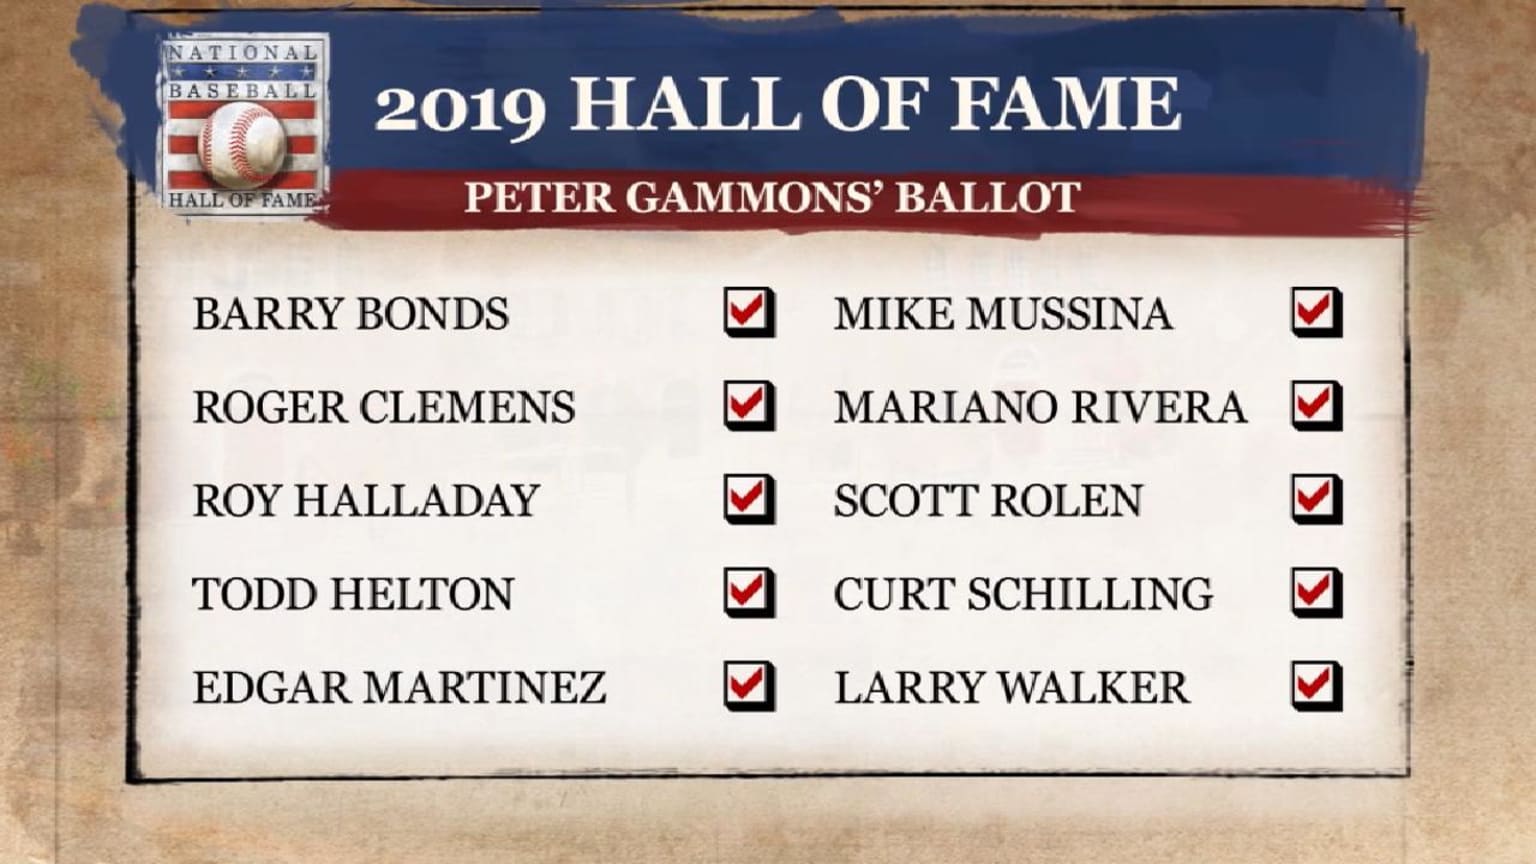 Philadelphia Phillies should remove Curt Schilling's Wall of Fame plaque,  cut ties with him